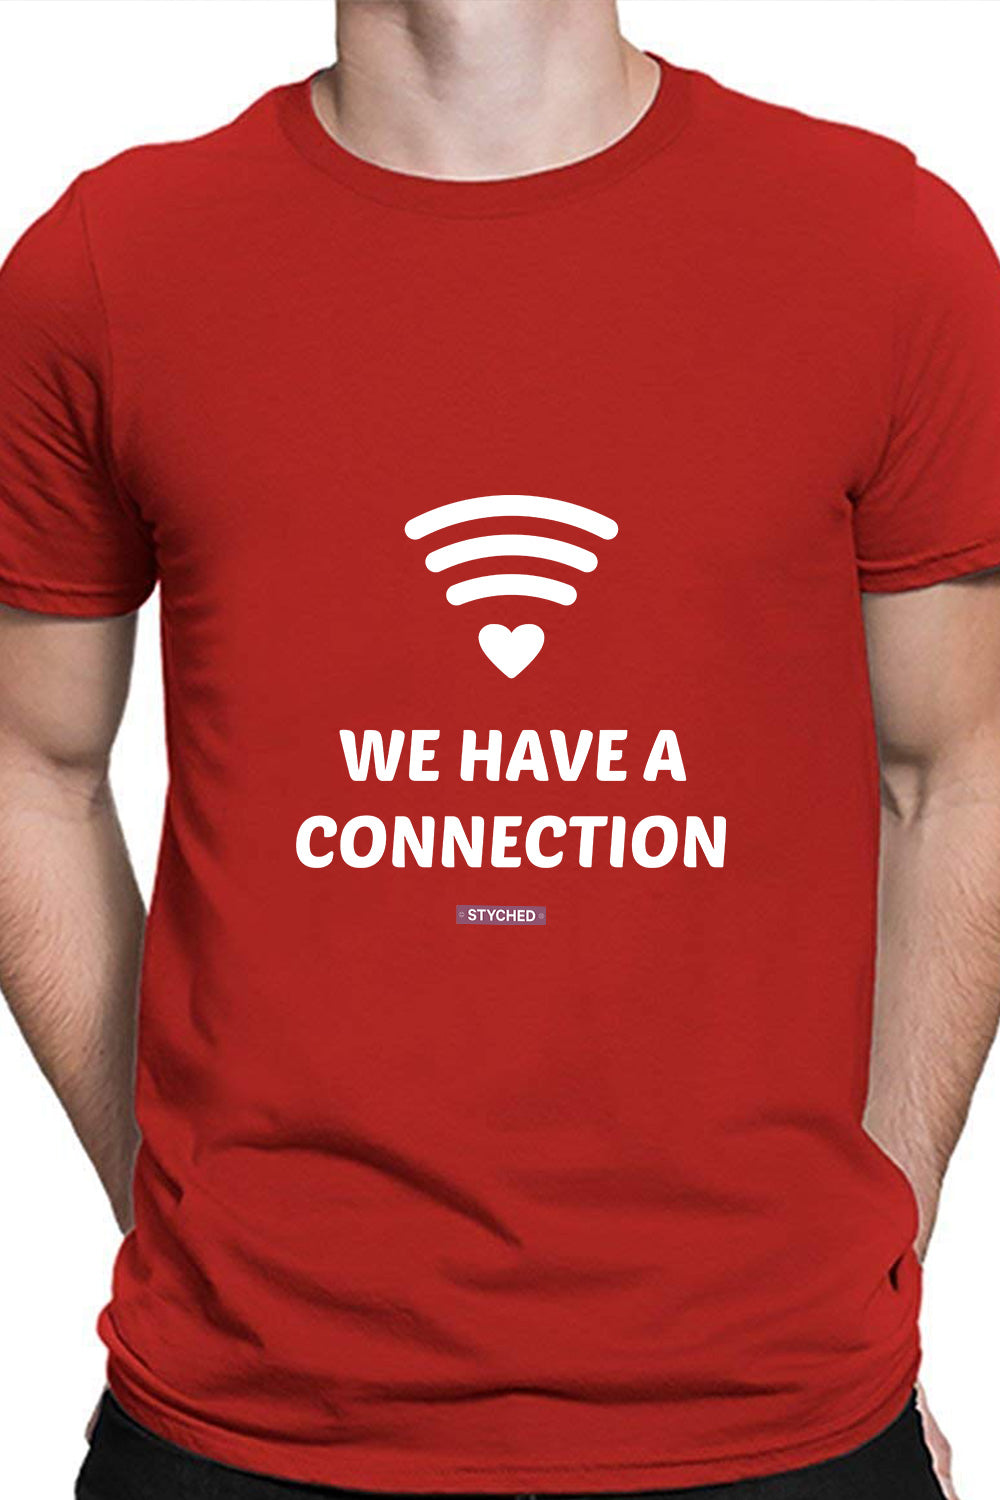 We have a connection - Funny Red Graphic Tee